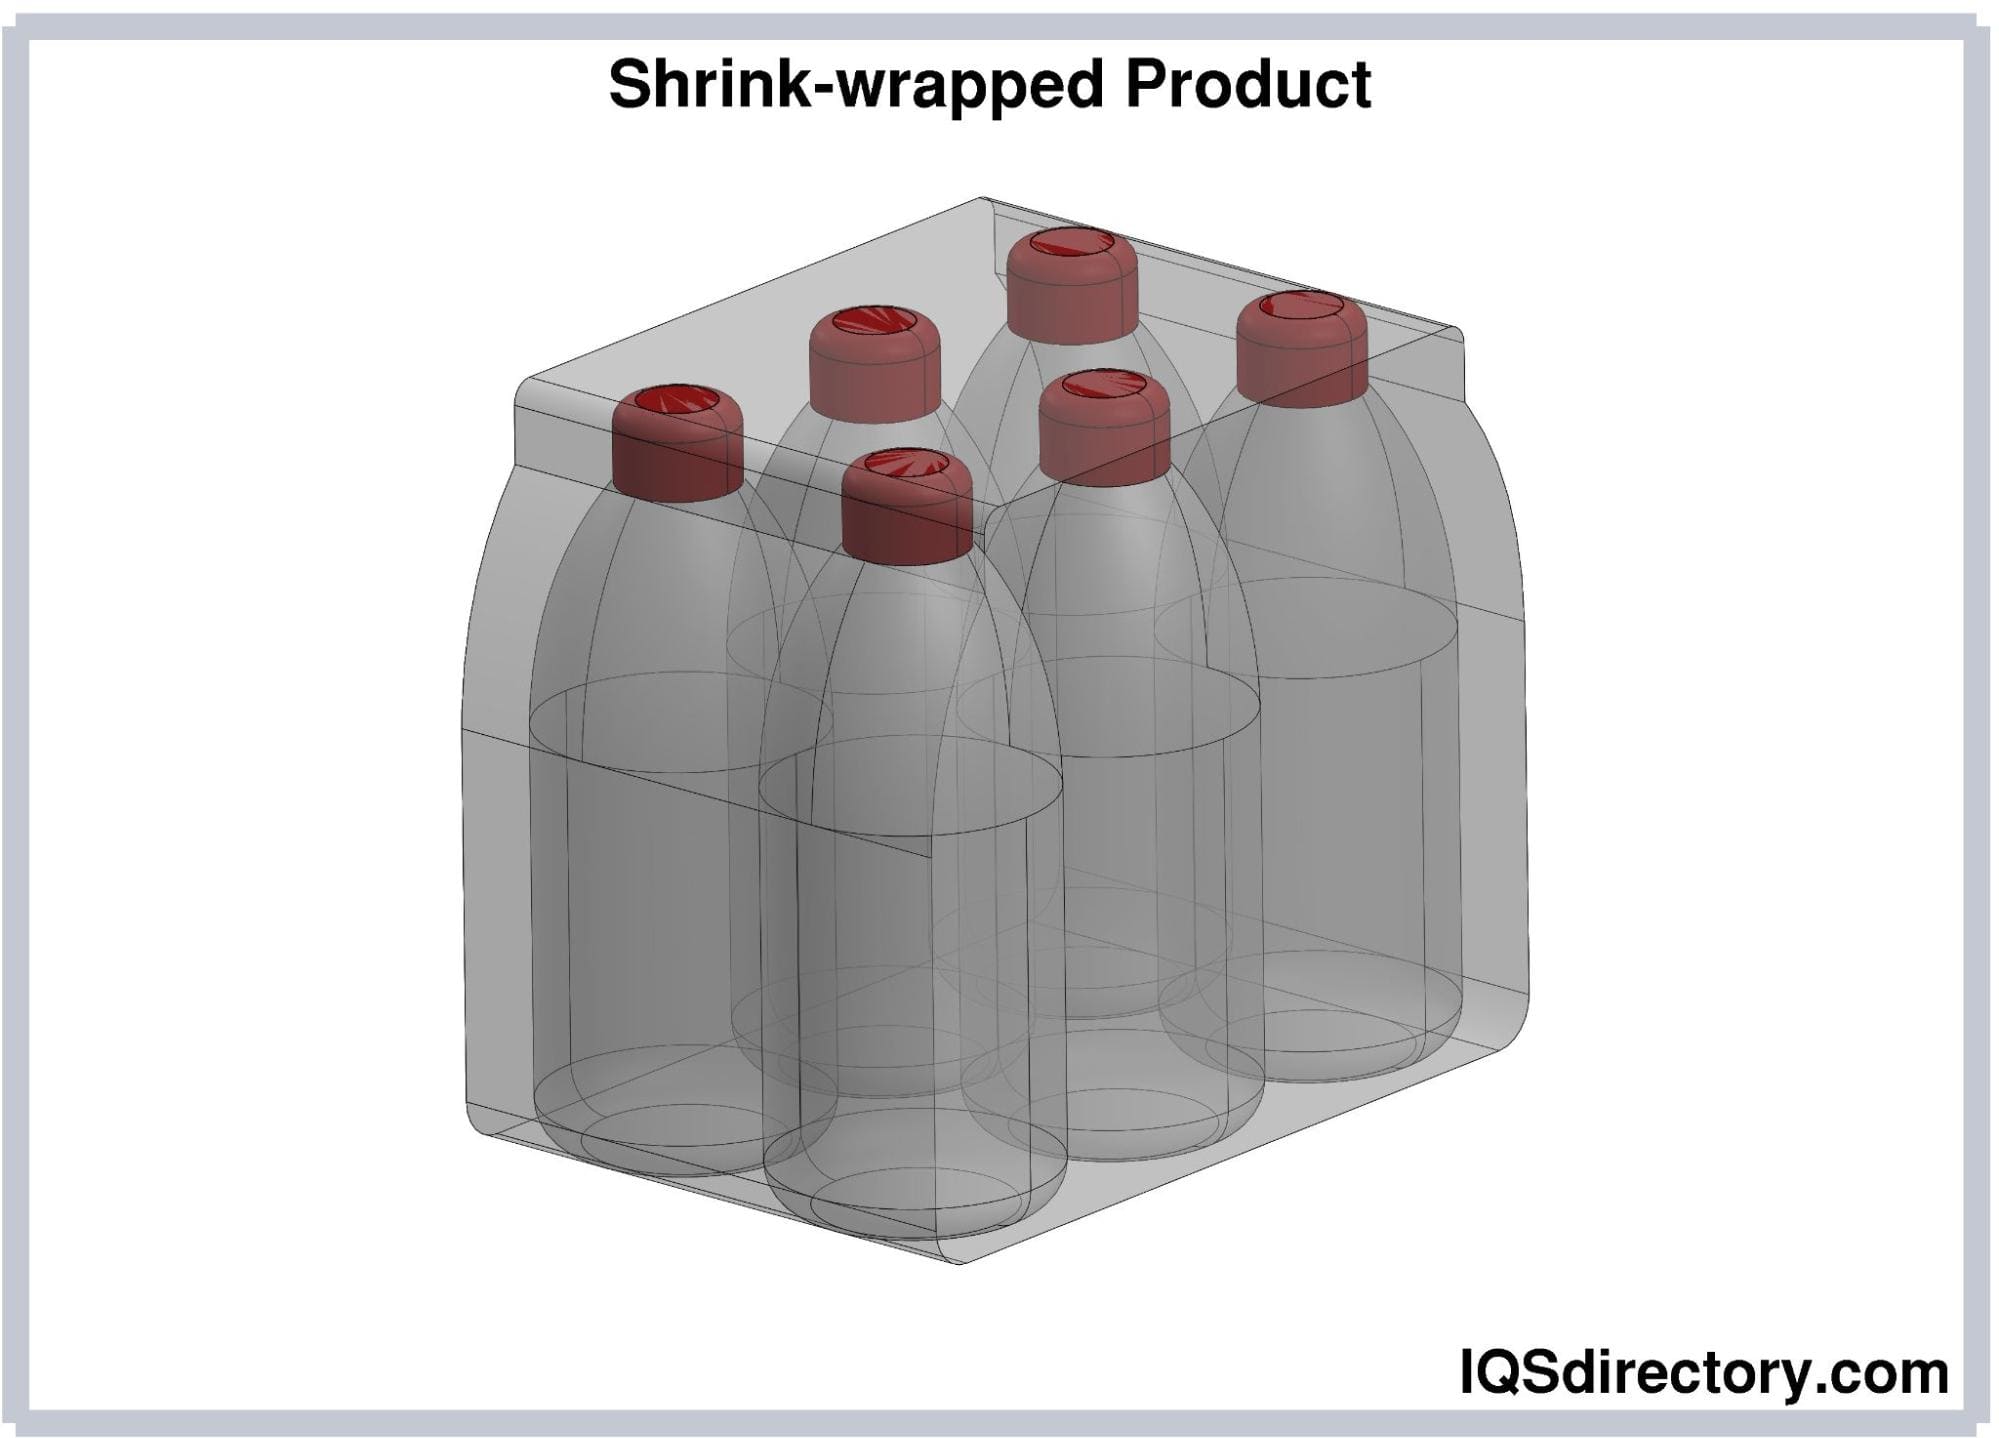 Shrink-wrapped Product